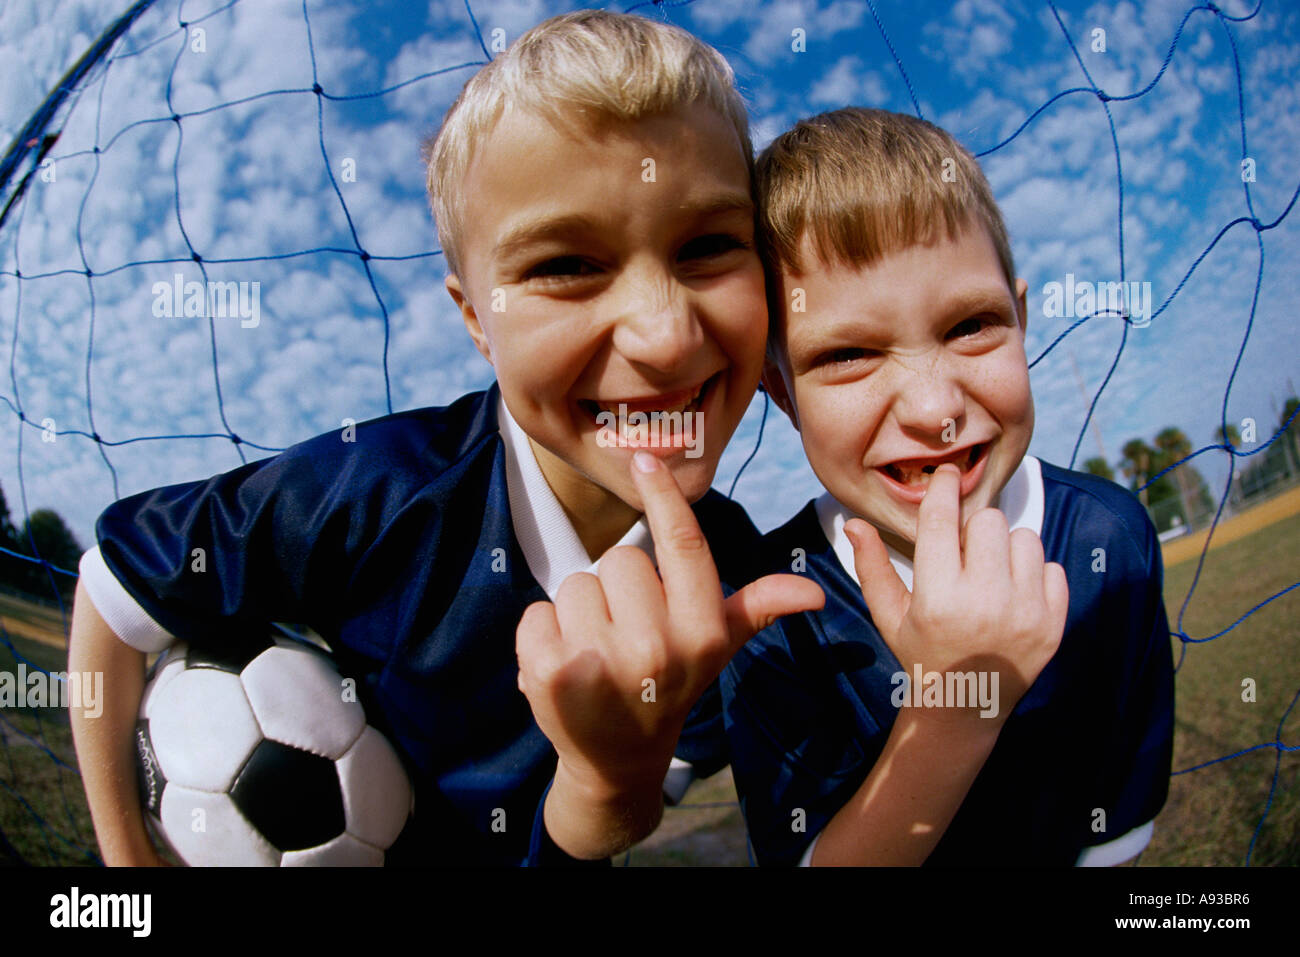 Portrait of two boys showing their missing teeth Stock Photo